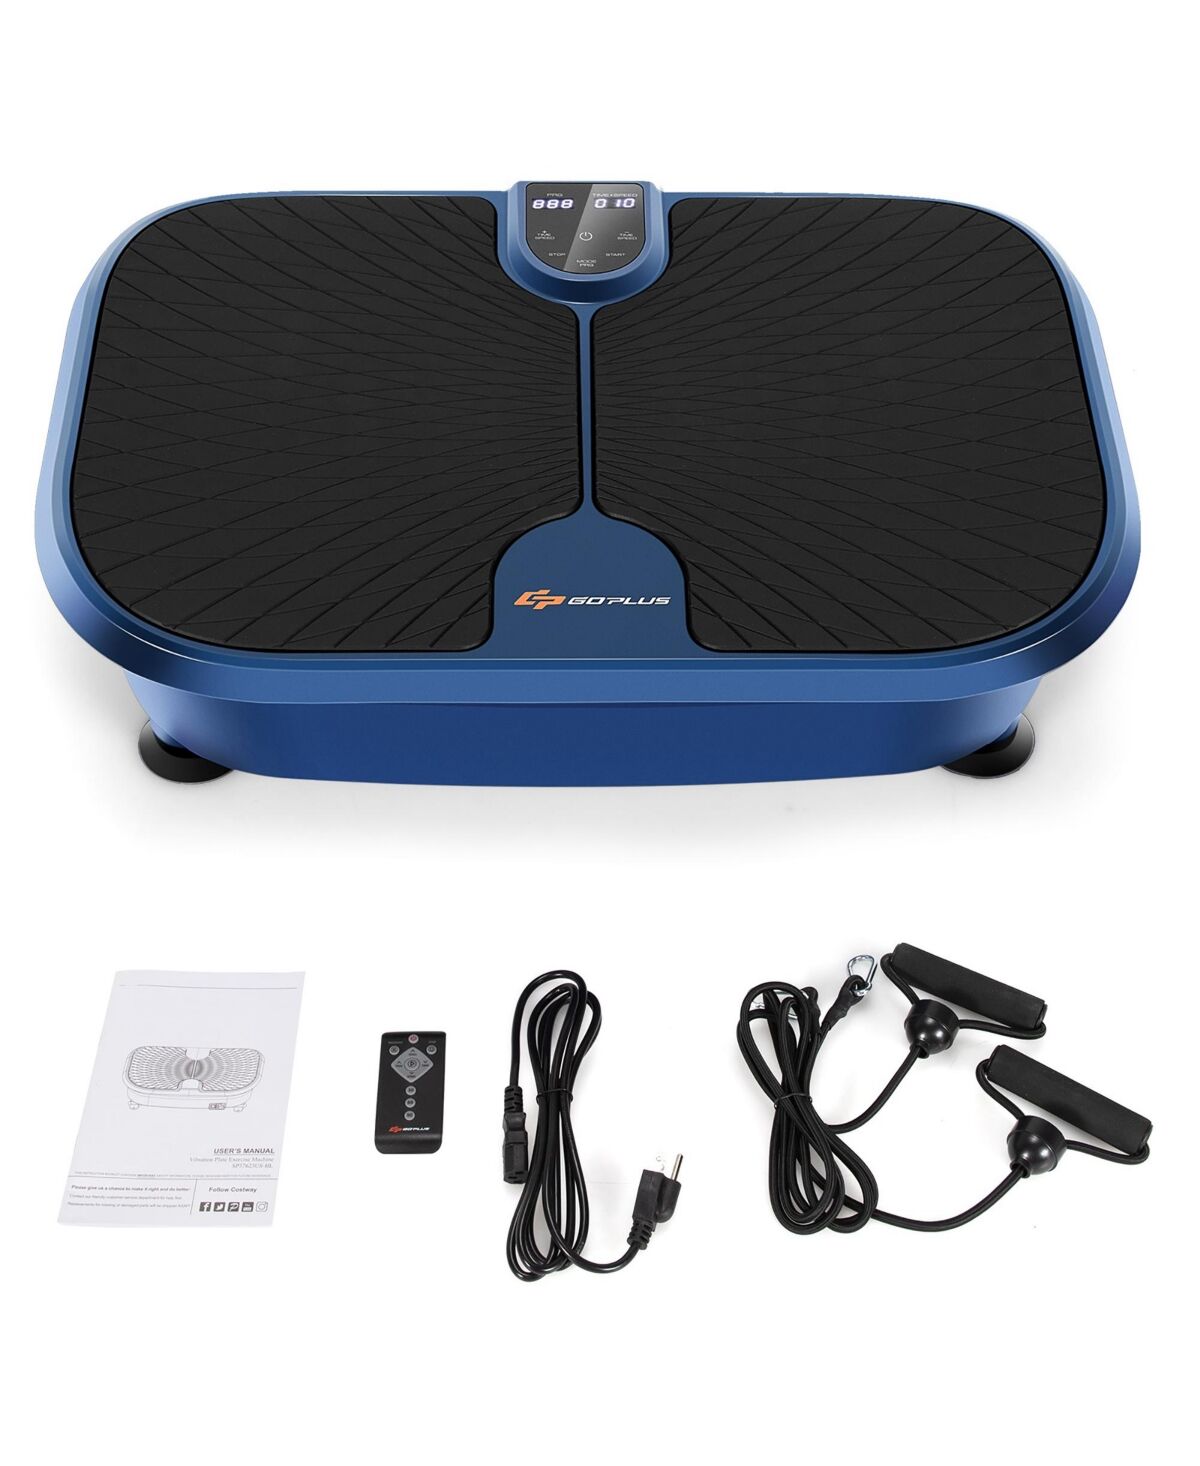 Costway Mini Vibration Plate Fitness Exercise Machine with Remote Control - Blue